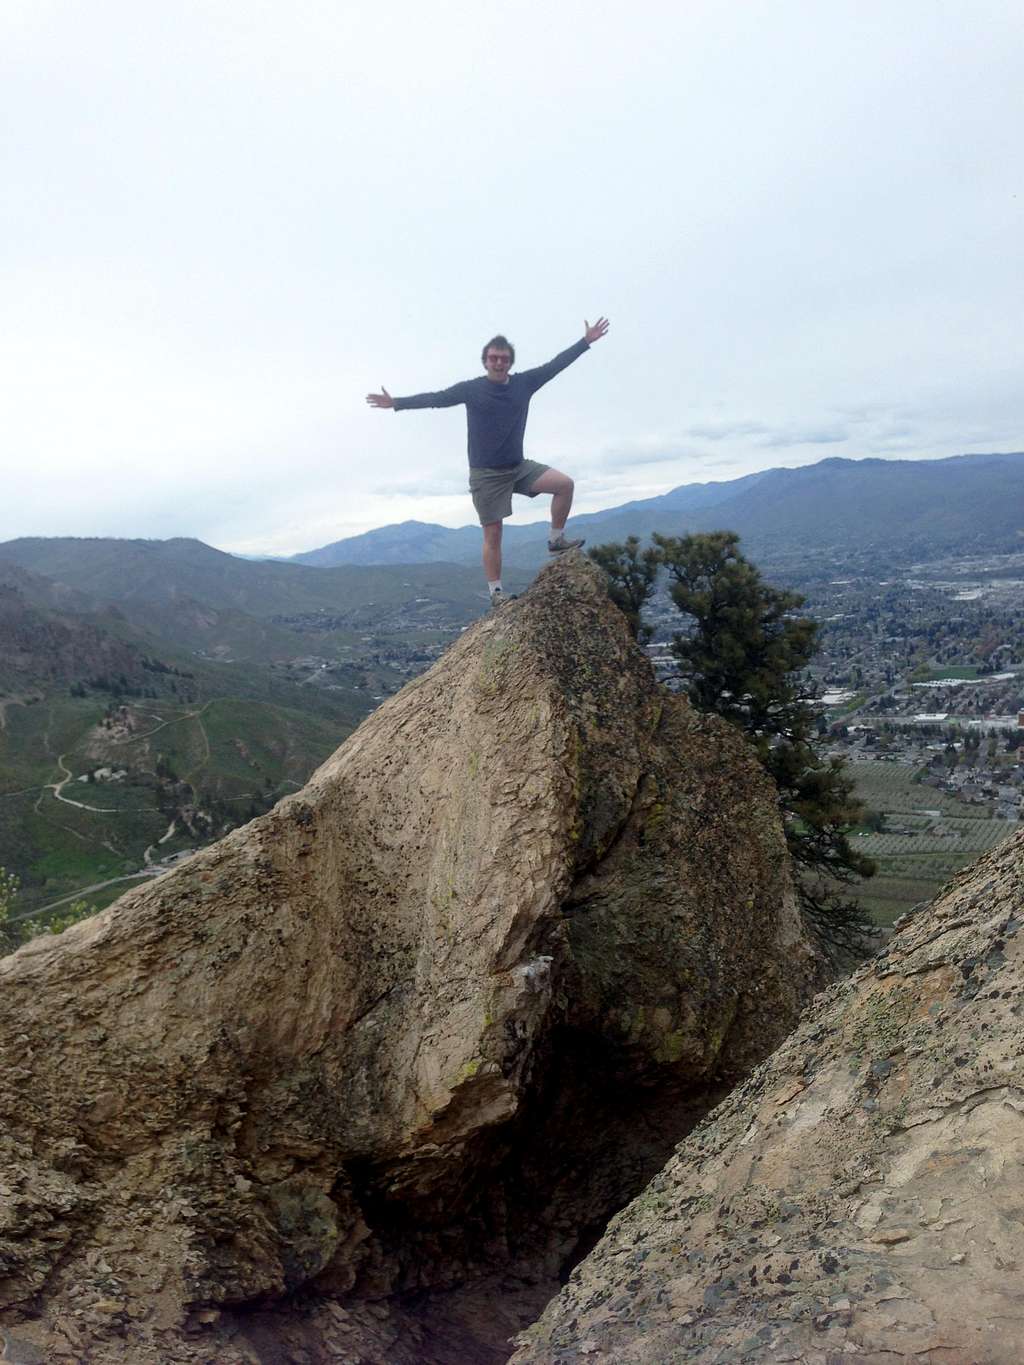 Josh Lewis on top of the rock